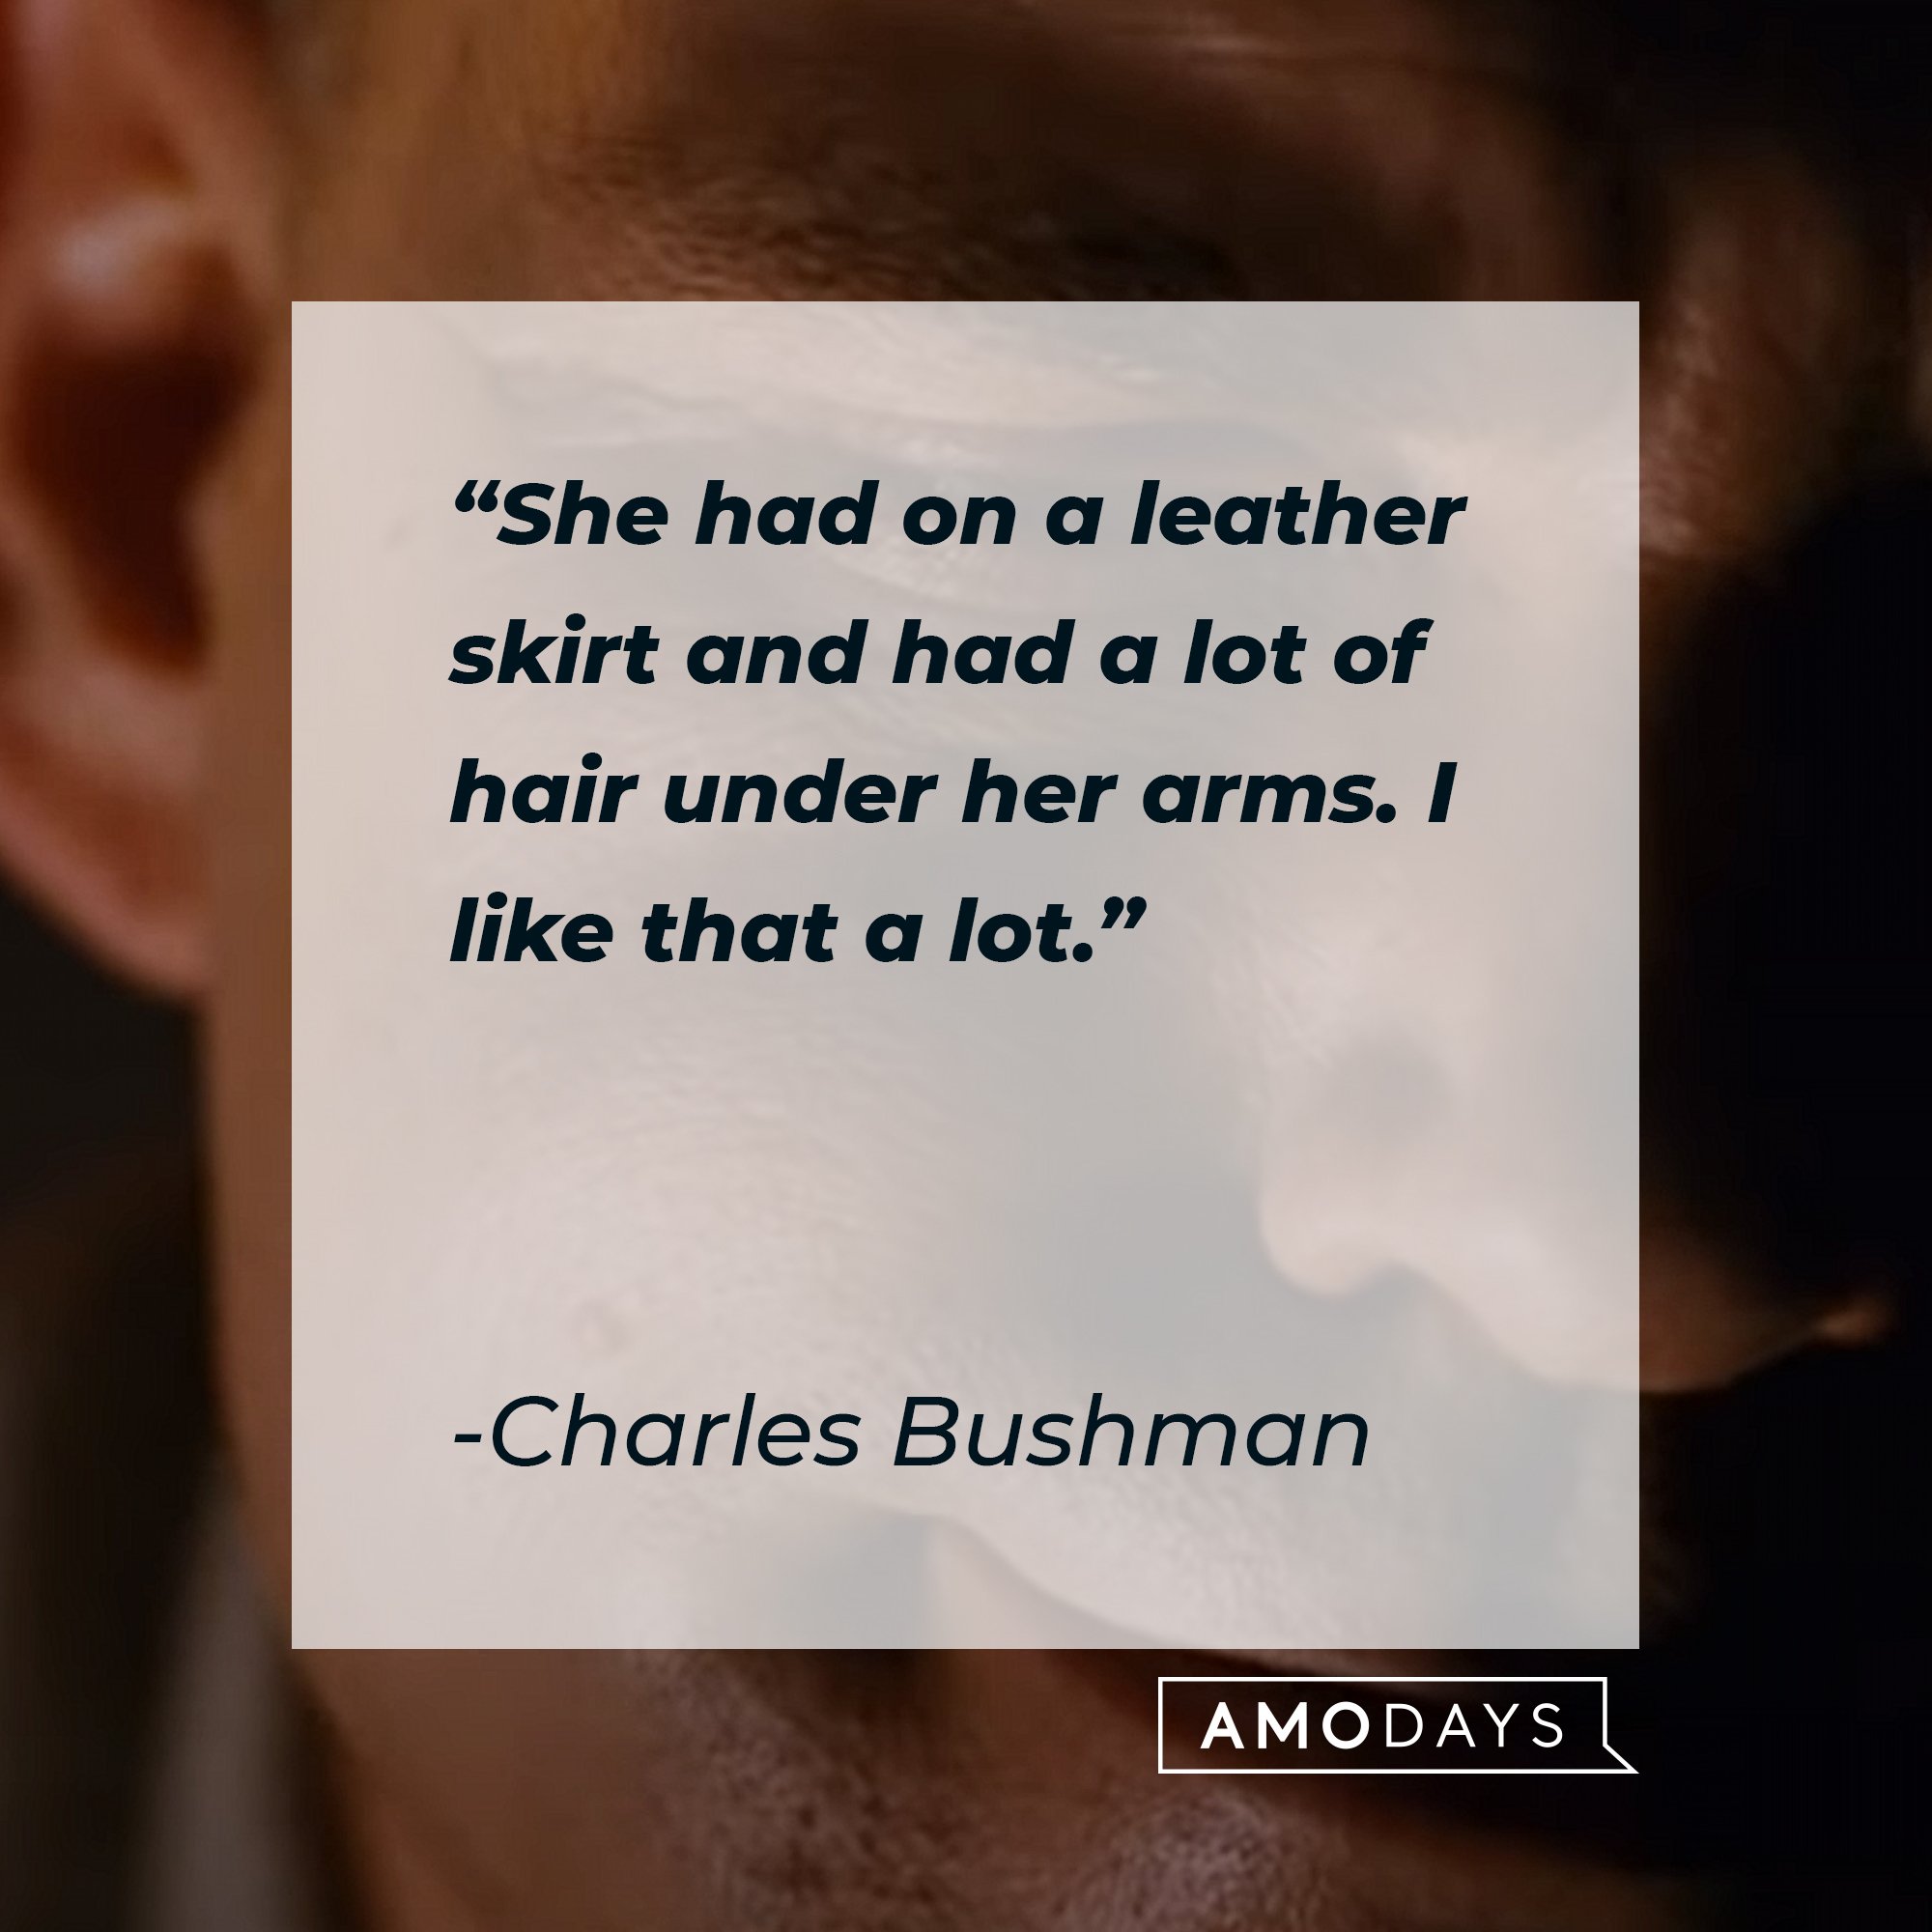  Charles Bushman’s quote: "She had on a leather skirt and had a lot of hair under her arms. I like that a lot." | Image: AmoDays